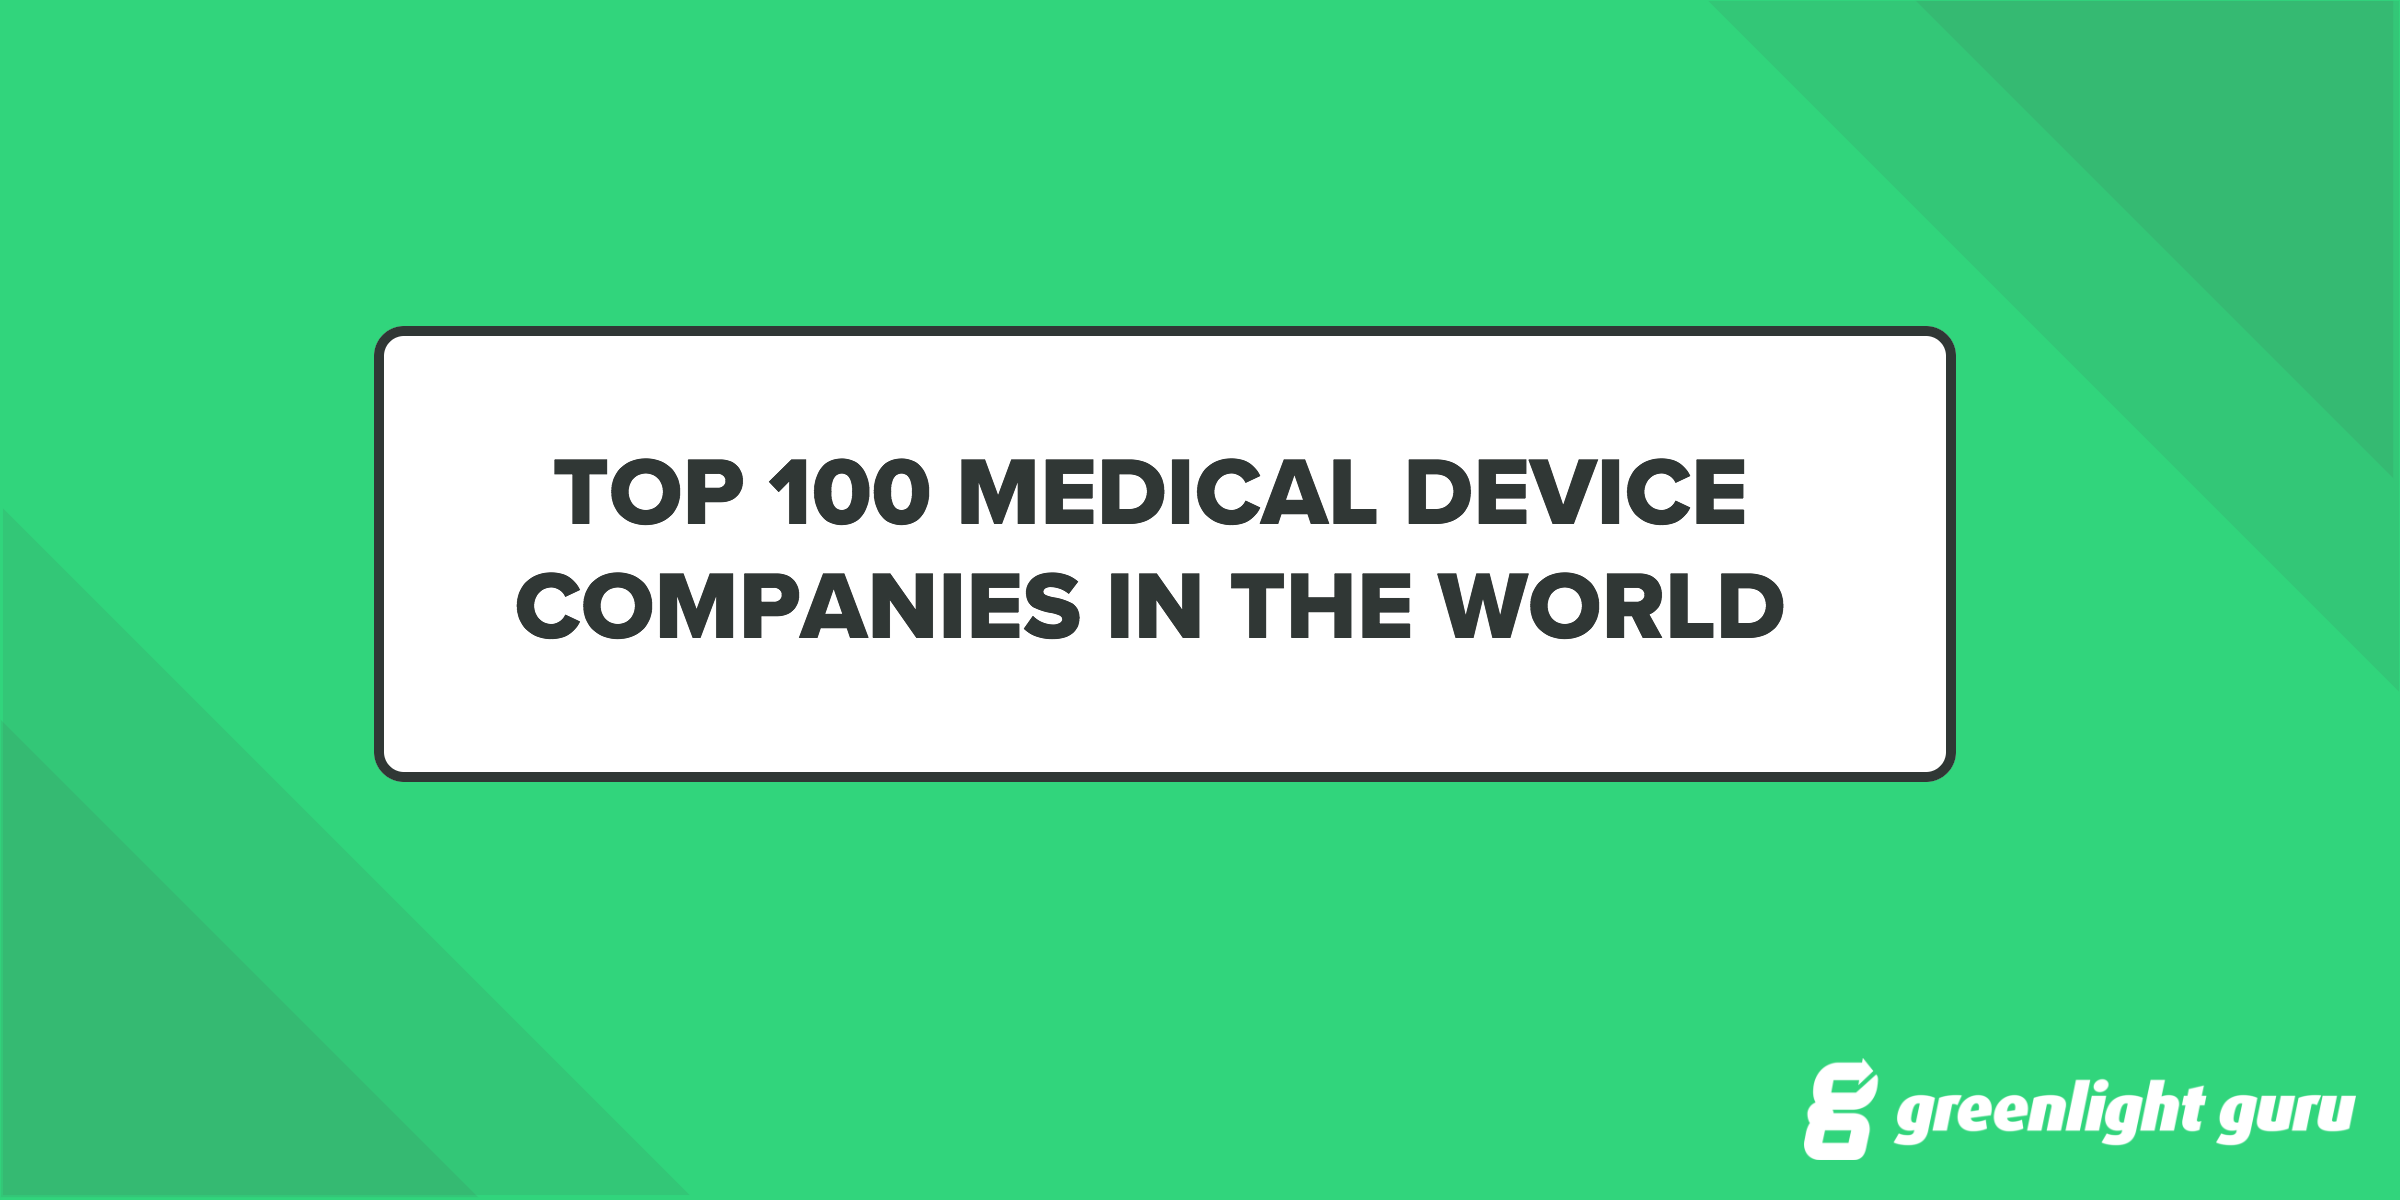 Medical Device Companies - Top 100 (Free Chart Included)